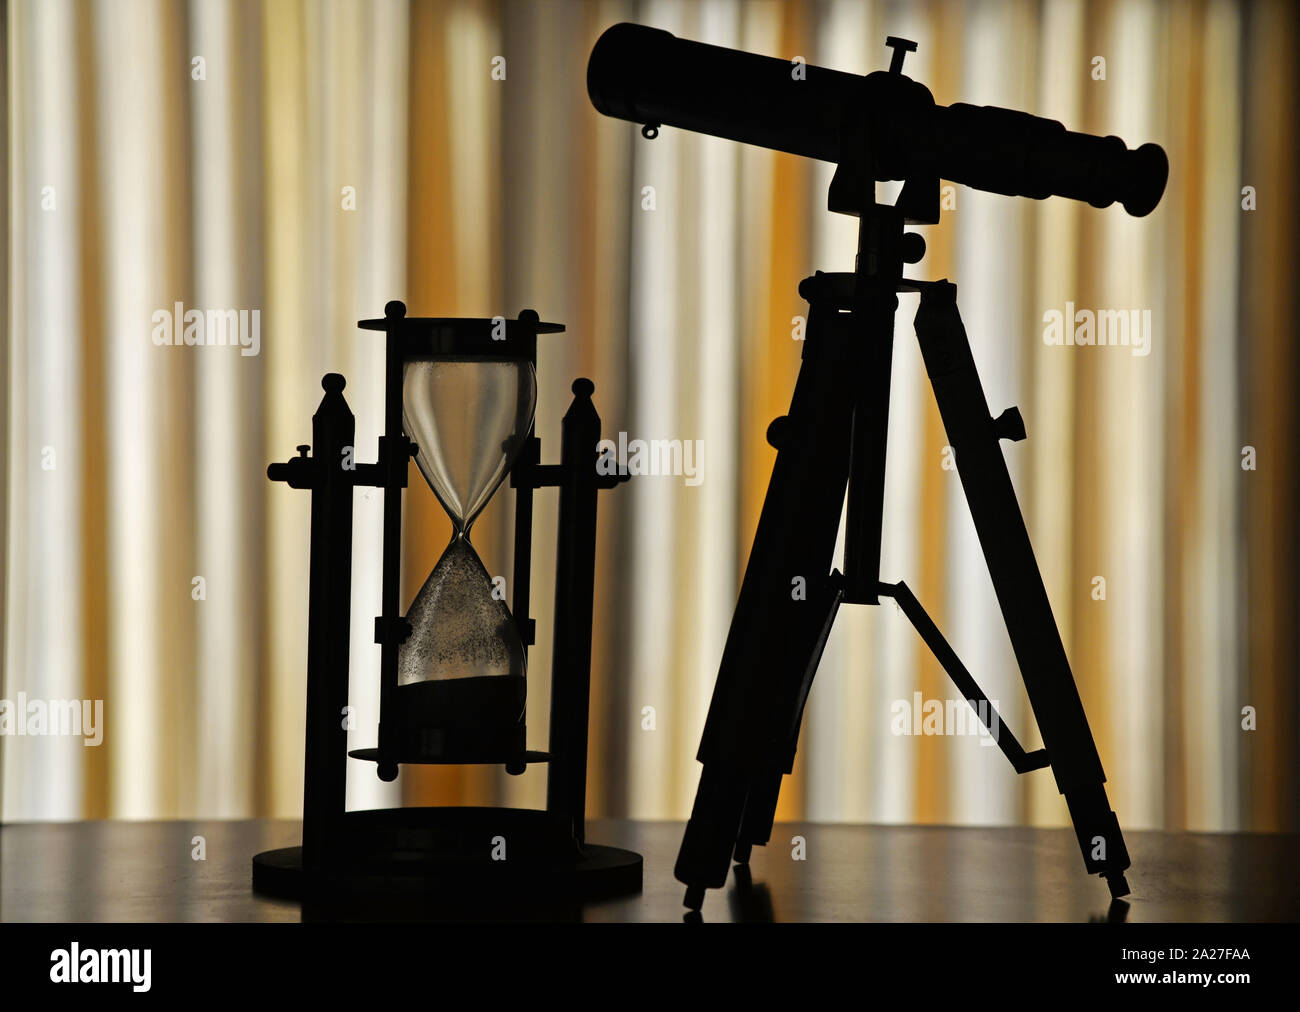 Silhouettes of a Hourglass and a telescope on a bookcase shelf. Concept : technology, exploration, science, observation, time etc. Stock Photo